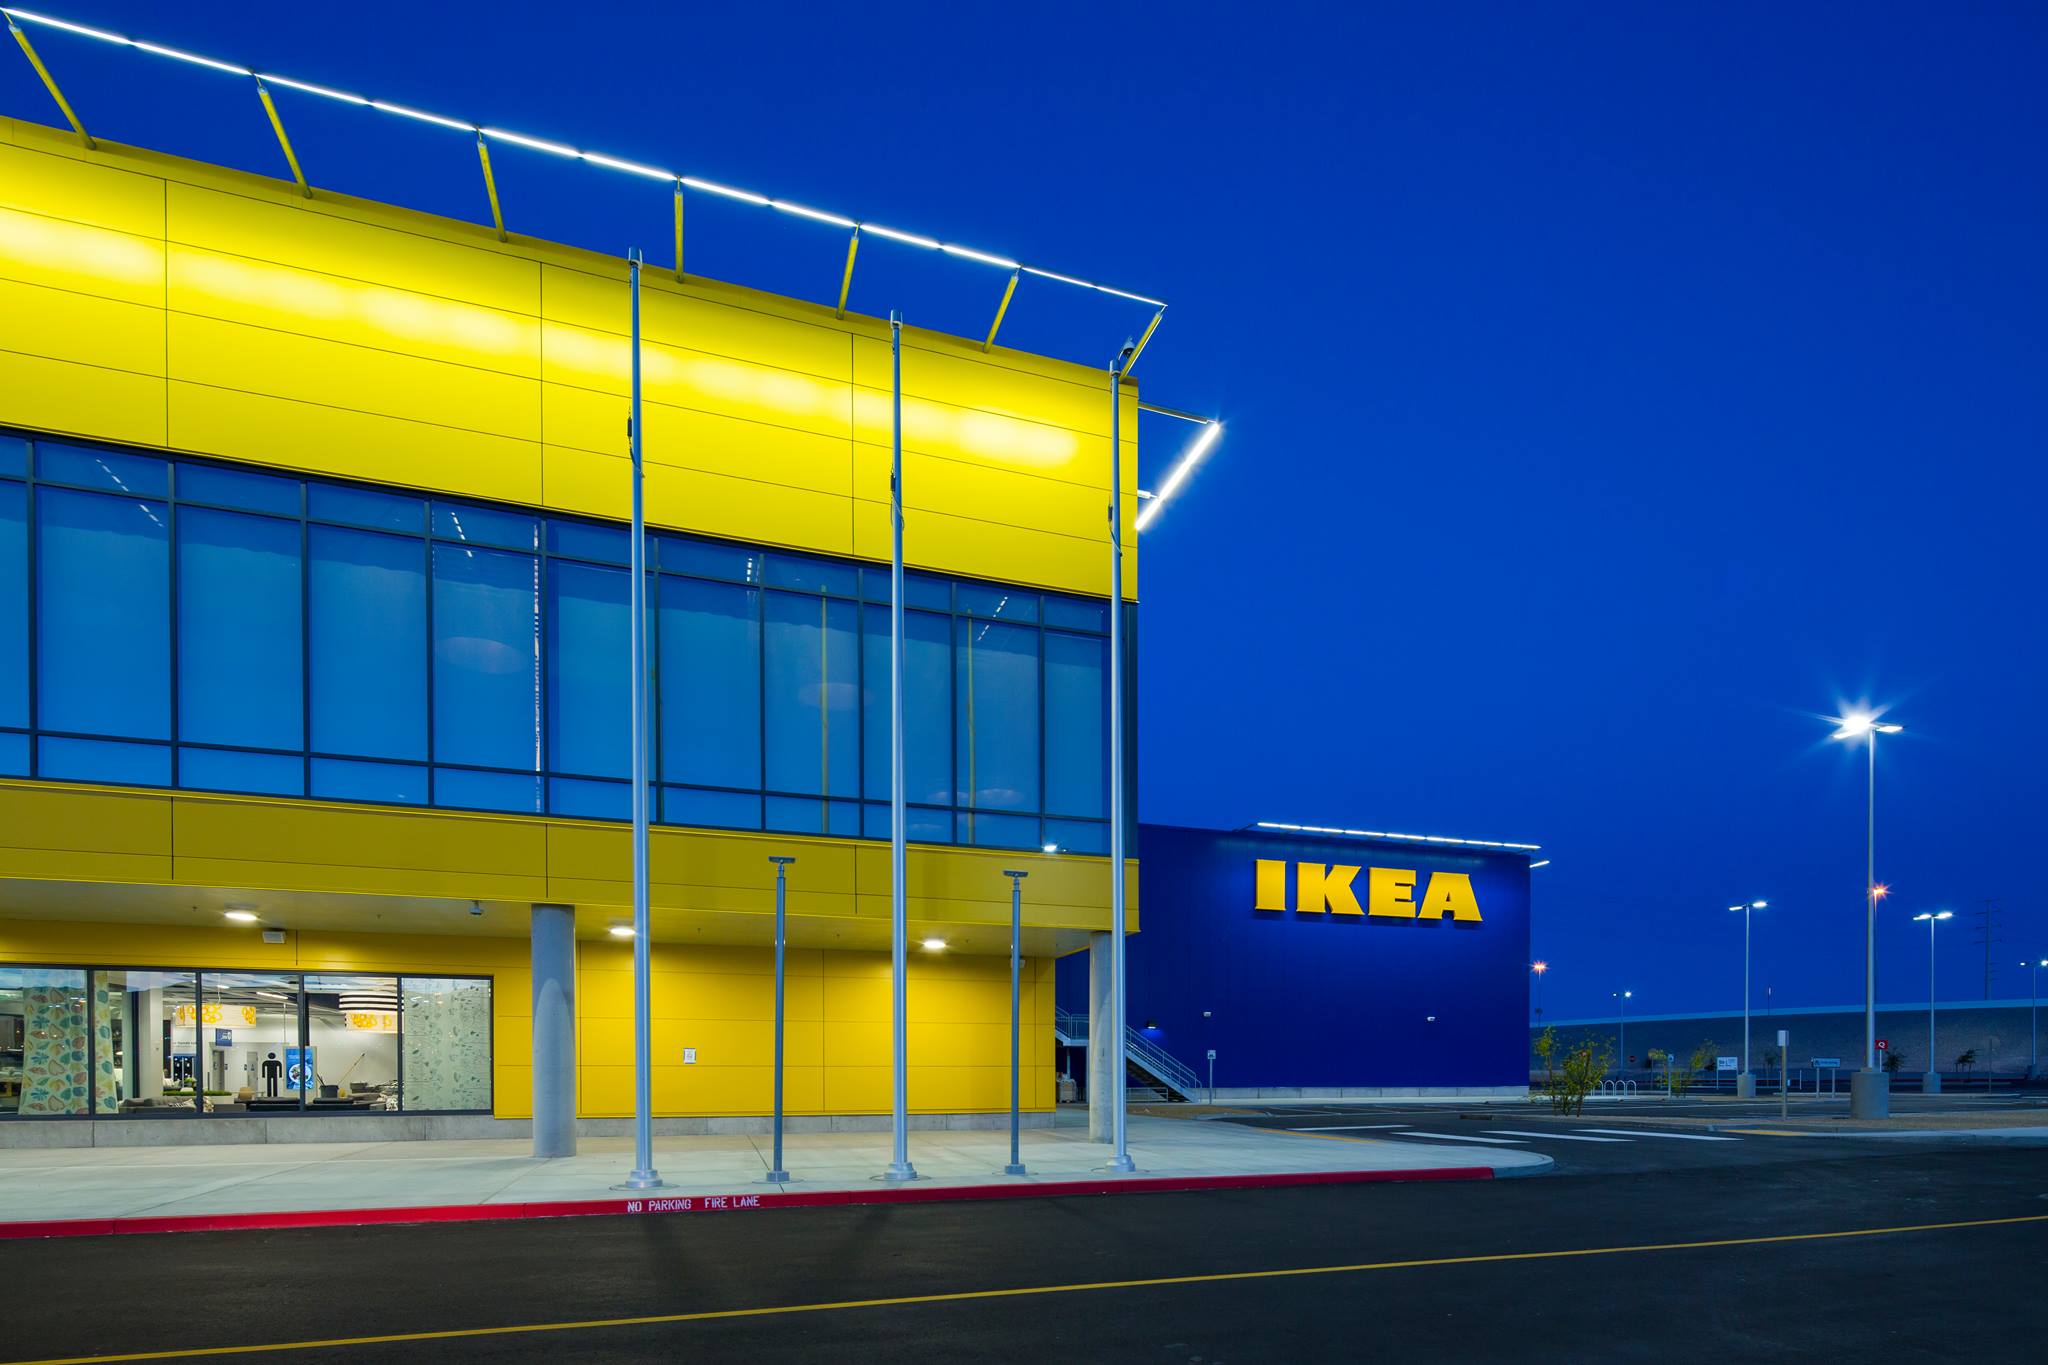 One of the Ikea project that R&O Construction completed